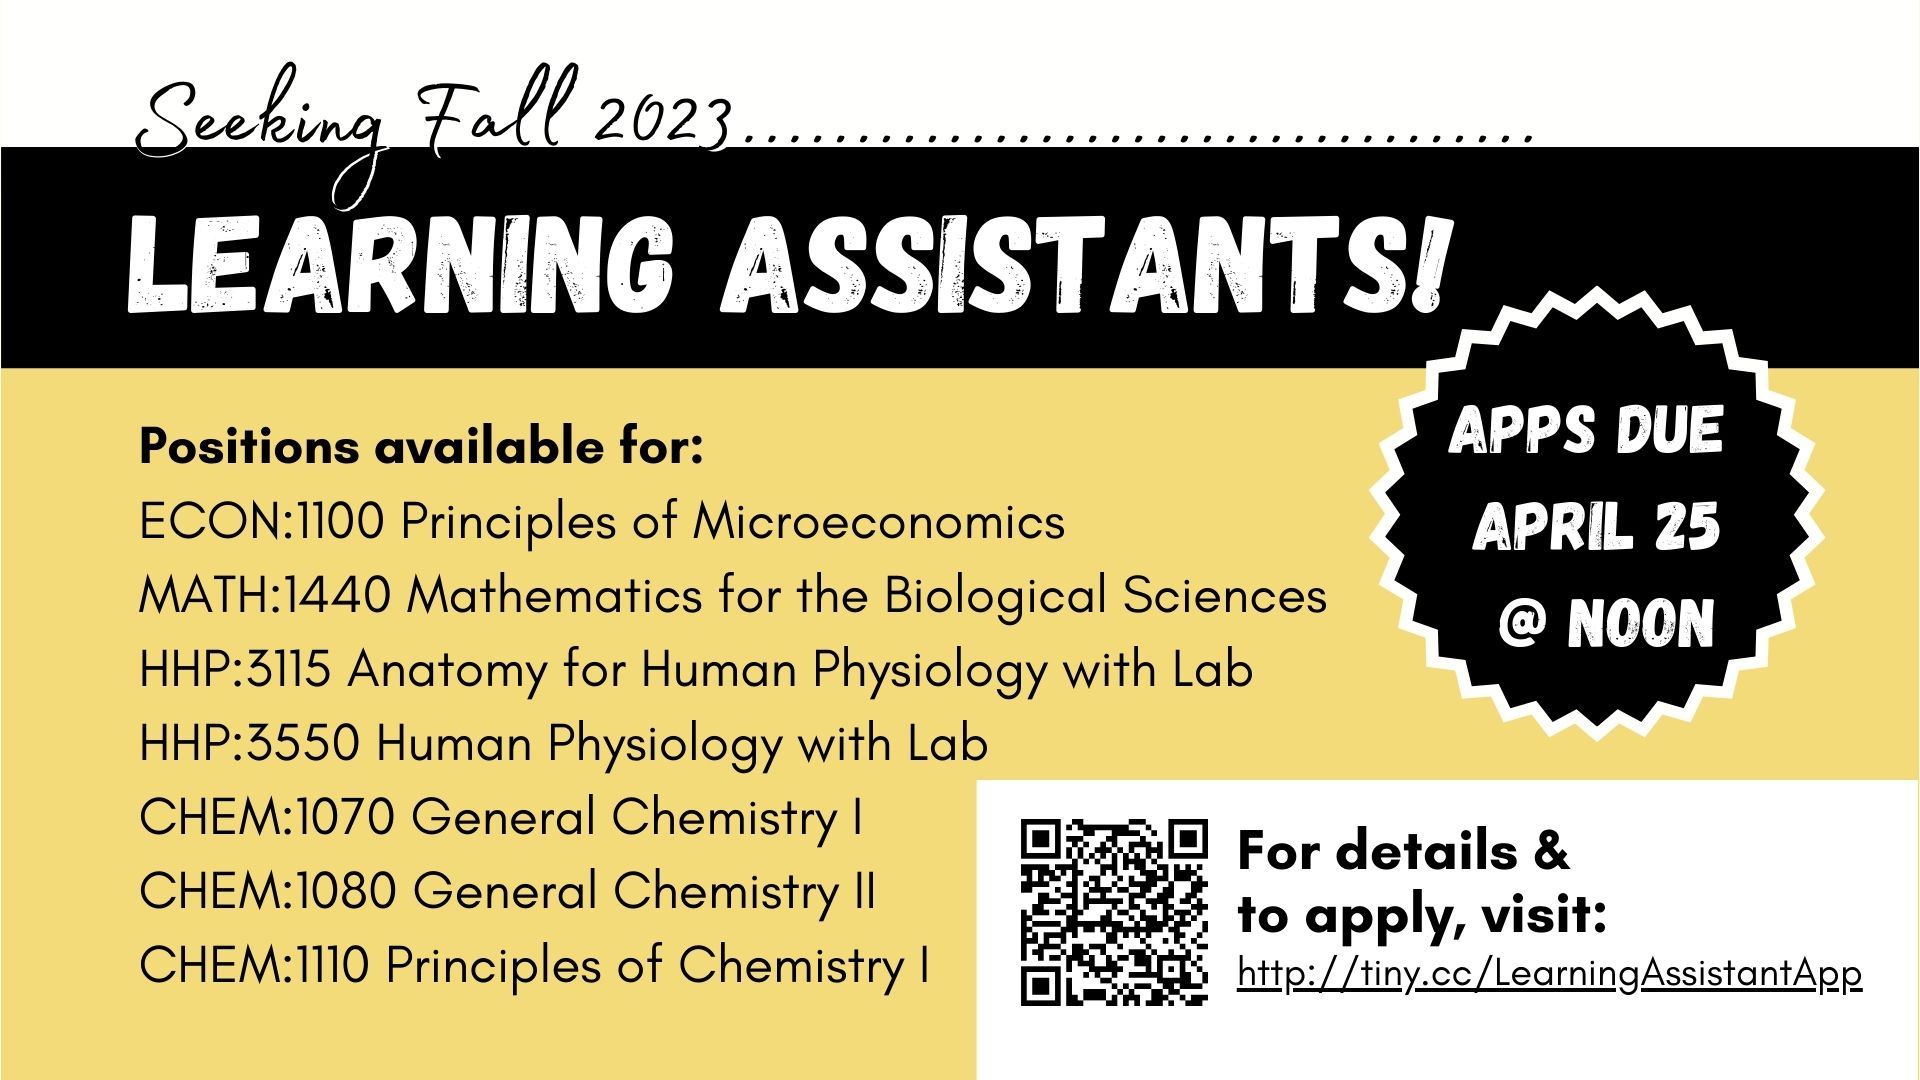 Seeking Fall 2023 Learning Assistants! Positions available for: ECON:1100 MATH:1440 HHP:5115 HHP:5550 CHEM:1070 CHEM:1080 CHEM:1110 For details and the application, list: https://tinyurl.com/LearningAssistantProgramUIowa Apps Due April 25